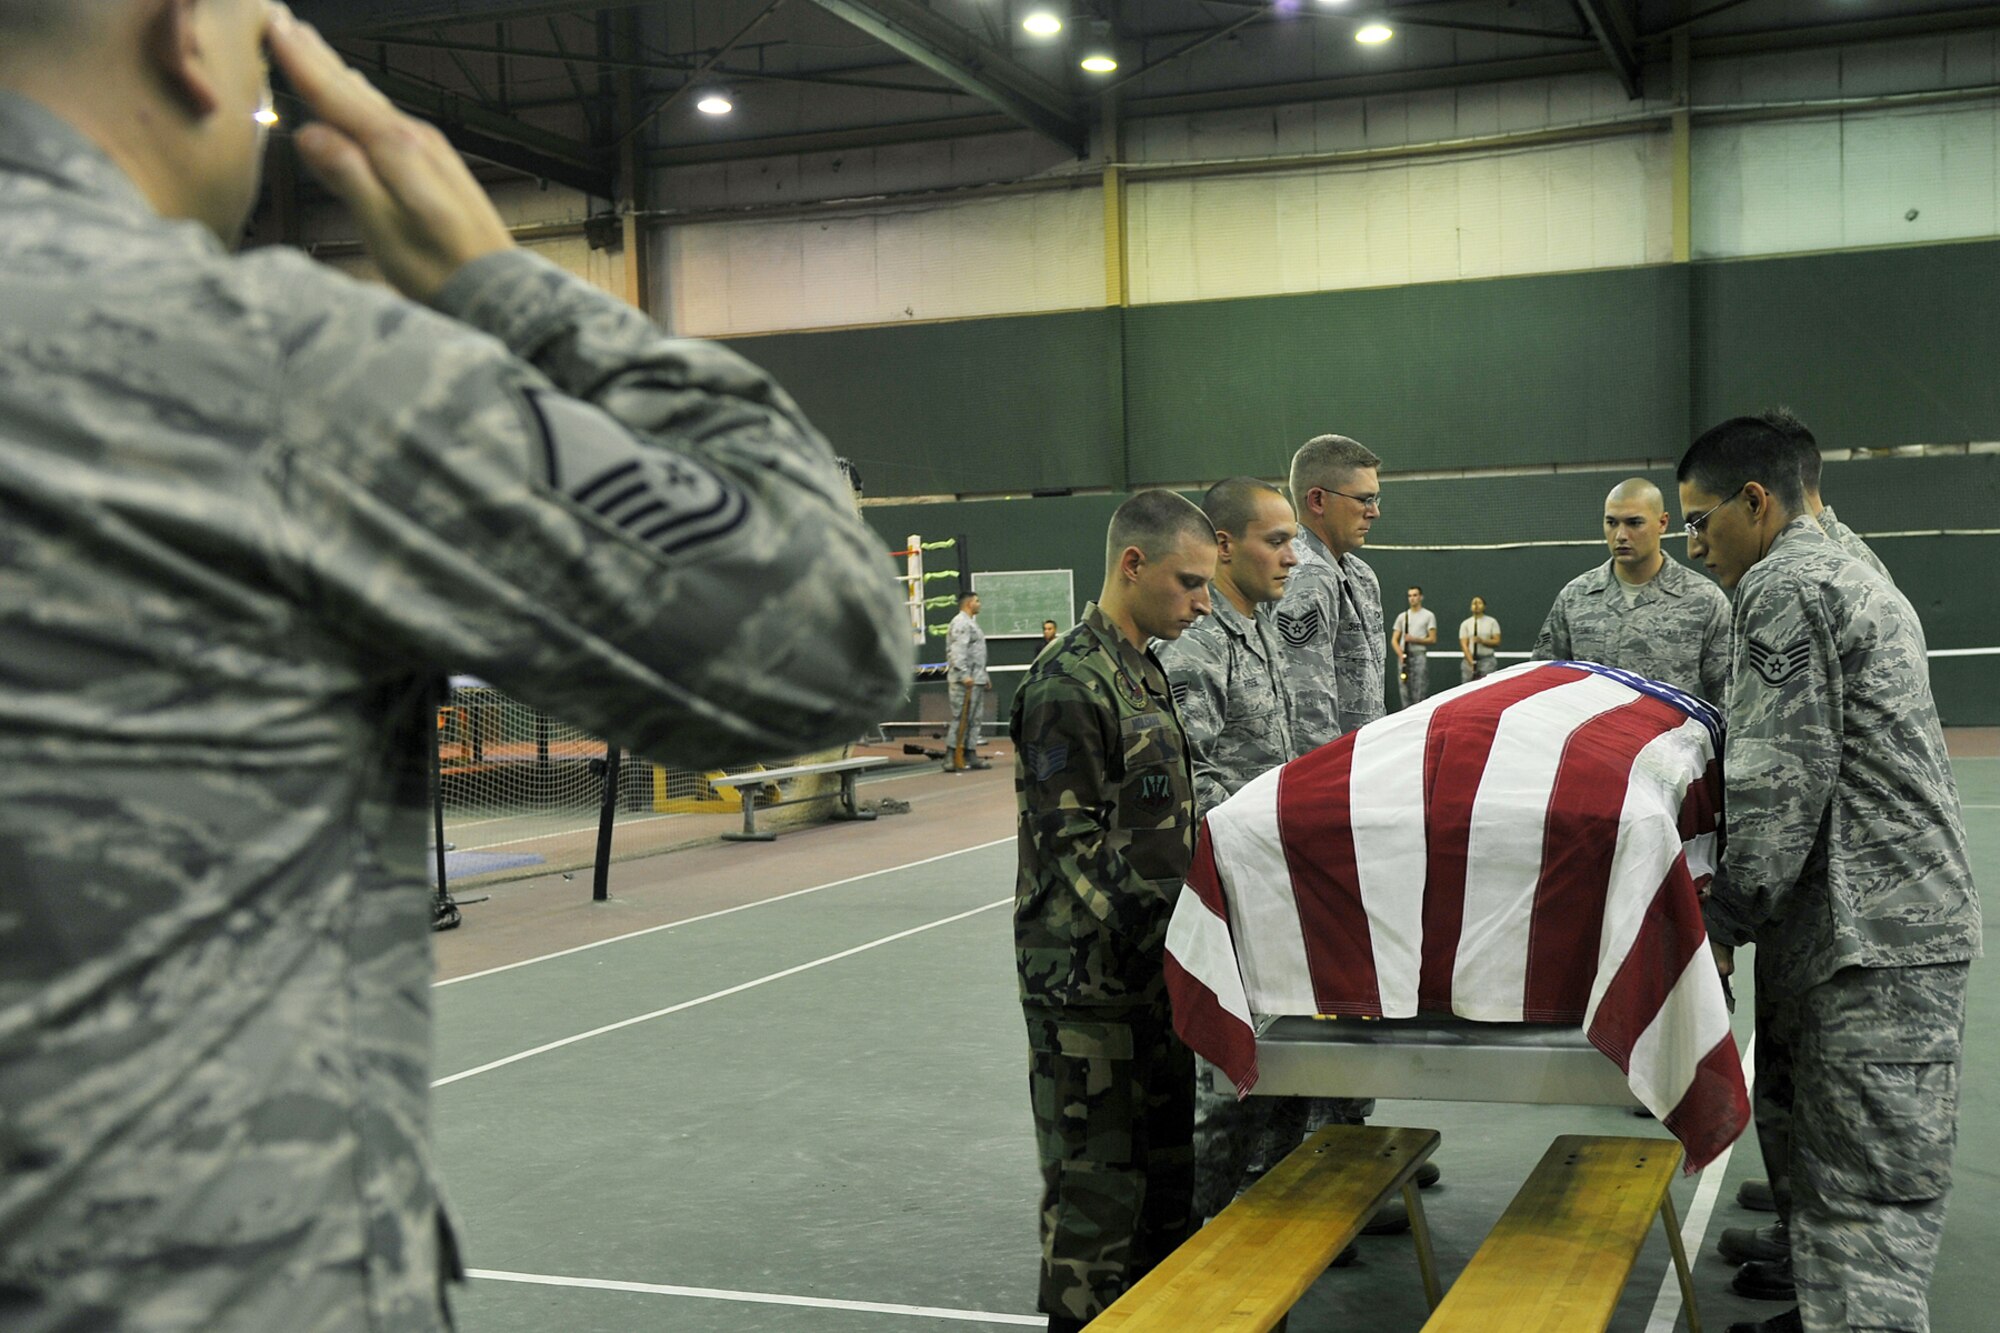 OFFUTT AIR FORCE BASE, Neb., -- Master Sgt. David Schmidt, 155th Security Forces Squadron, salutes a simulated deceased Airman while other honor guard members carry the coffin durng an Air Force Honor Guard training session at the Martin Bomber Building here Oct. 21. The Air Force Honor Guard visited Offutt to evaluate and help sharpen the skills of Offutt's Honor Guard members, as well as honor guard members from numerous installations. U.S. Air Force Photo by Charles Haymond